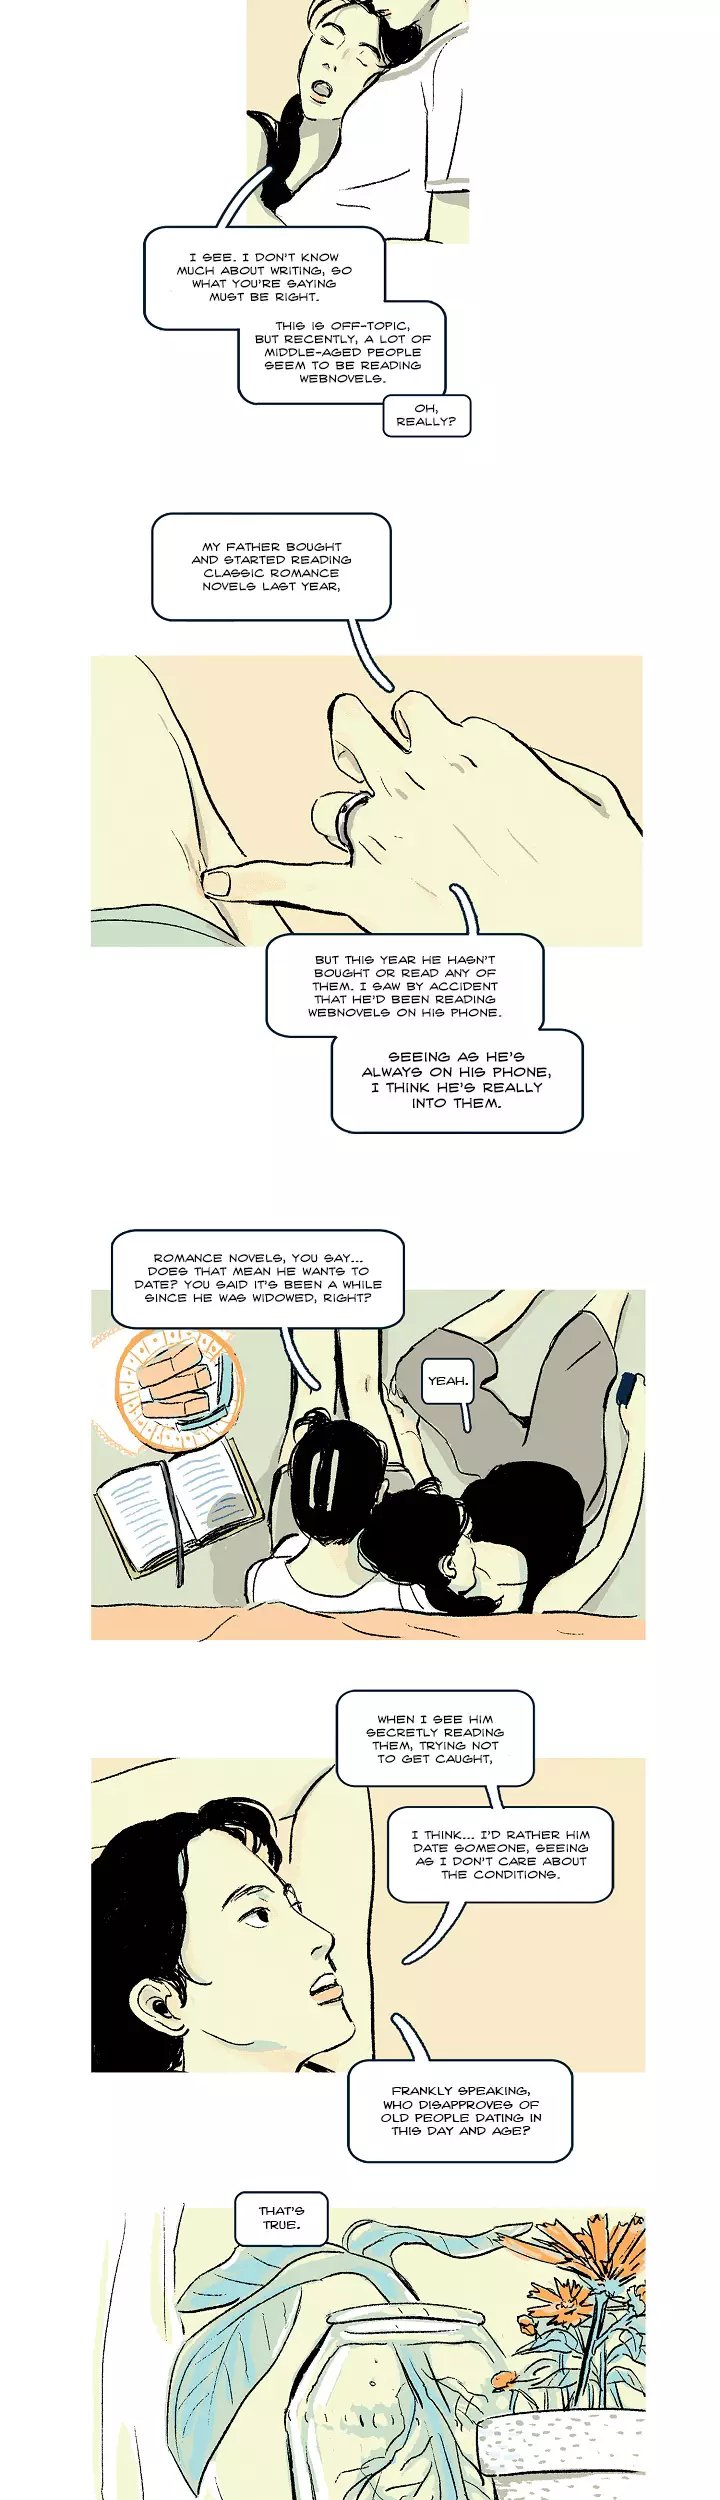 The Professor Who Reads Love Stories - 3 page 2-bc6e32b2